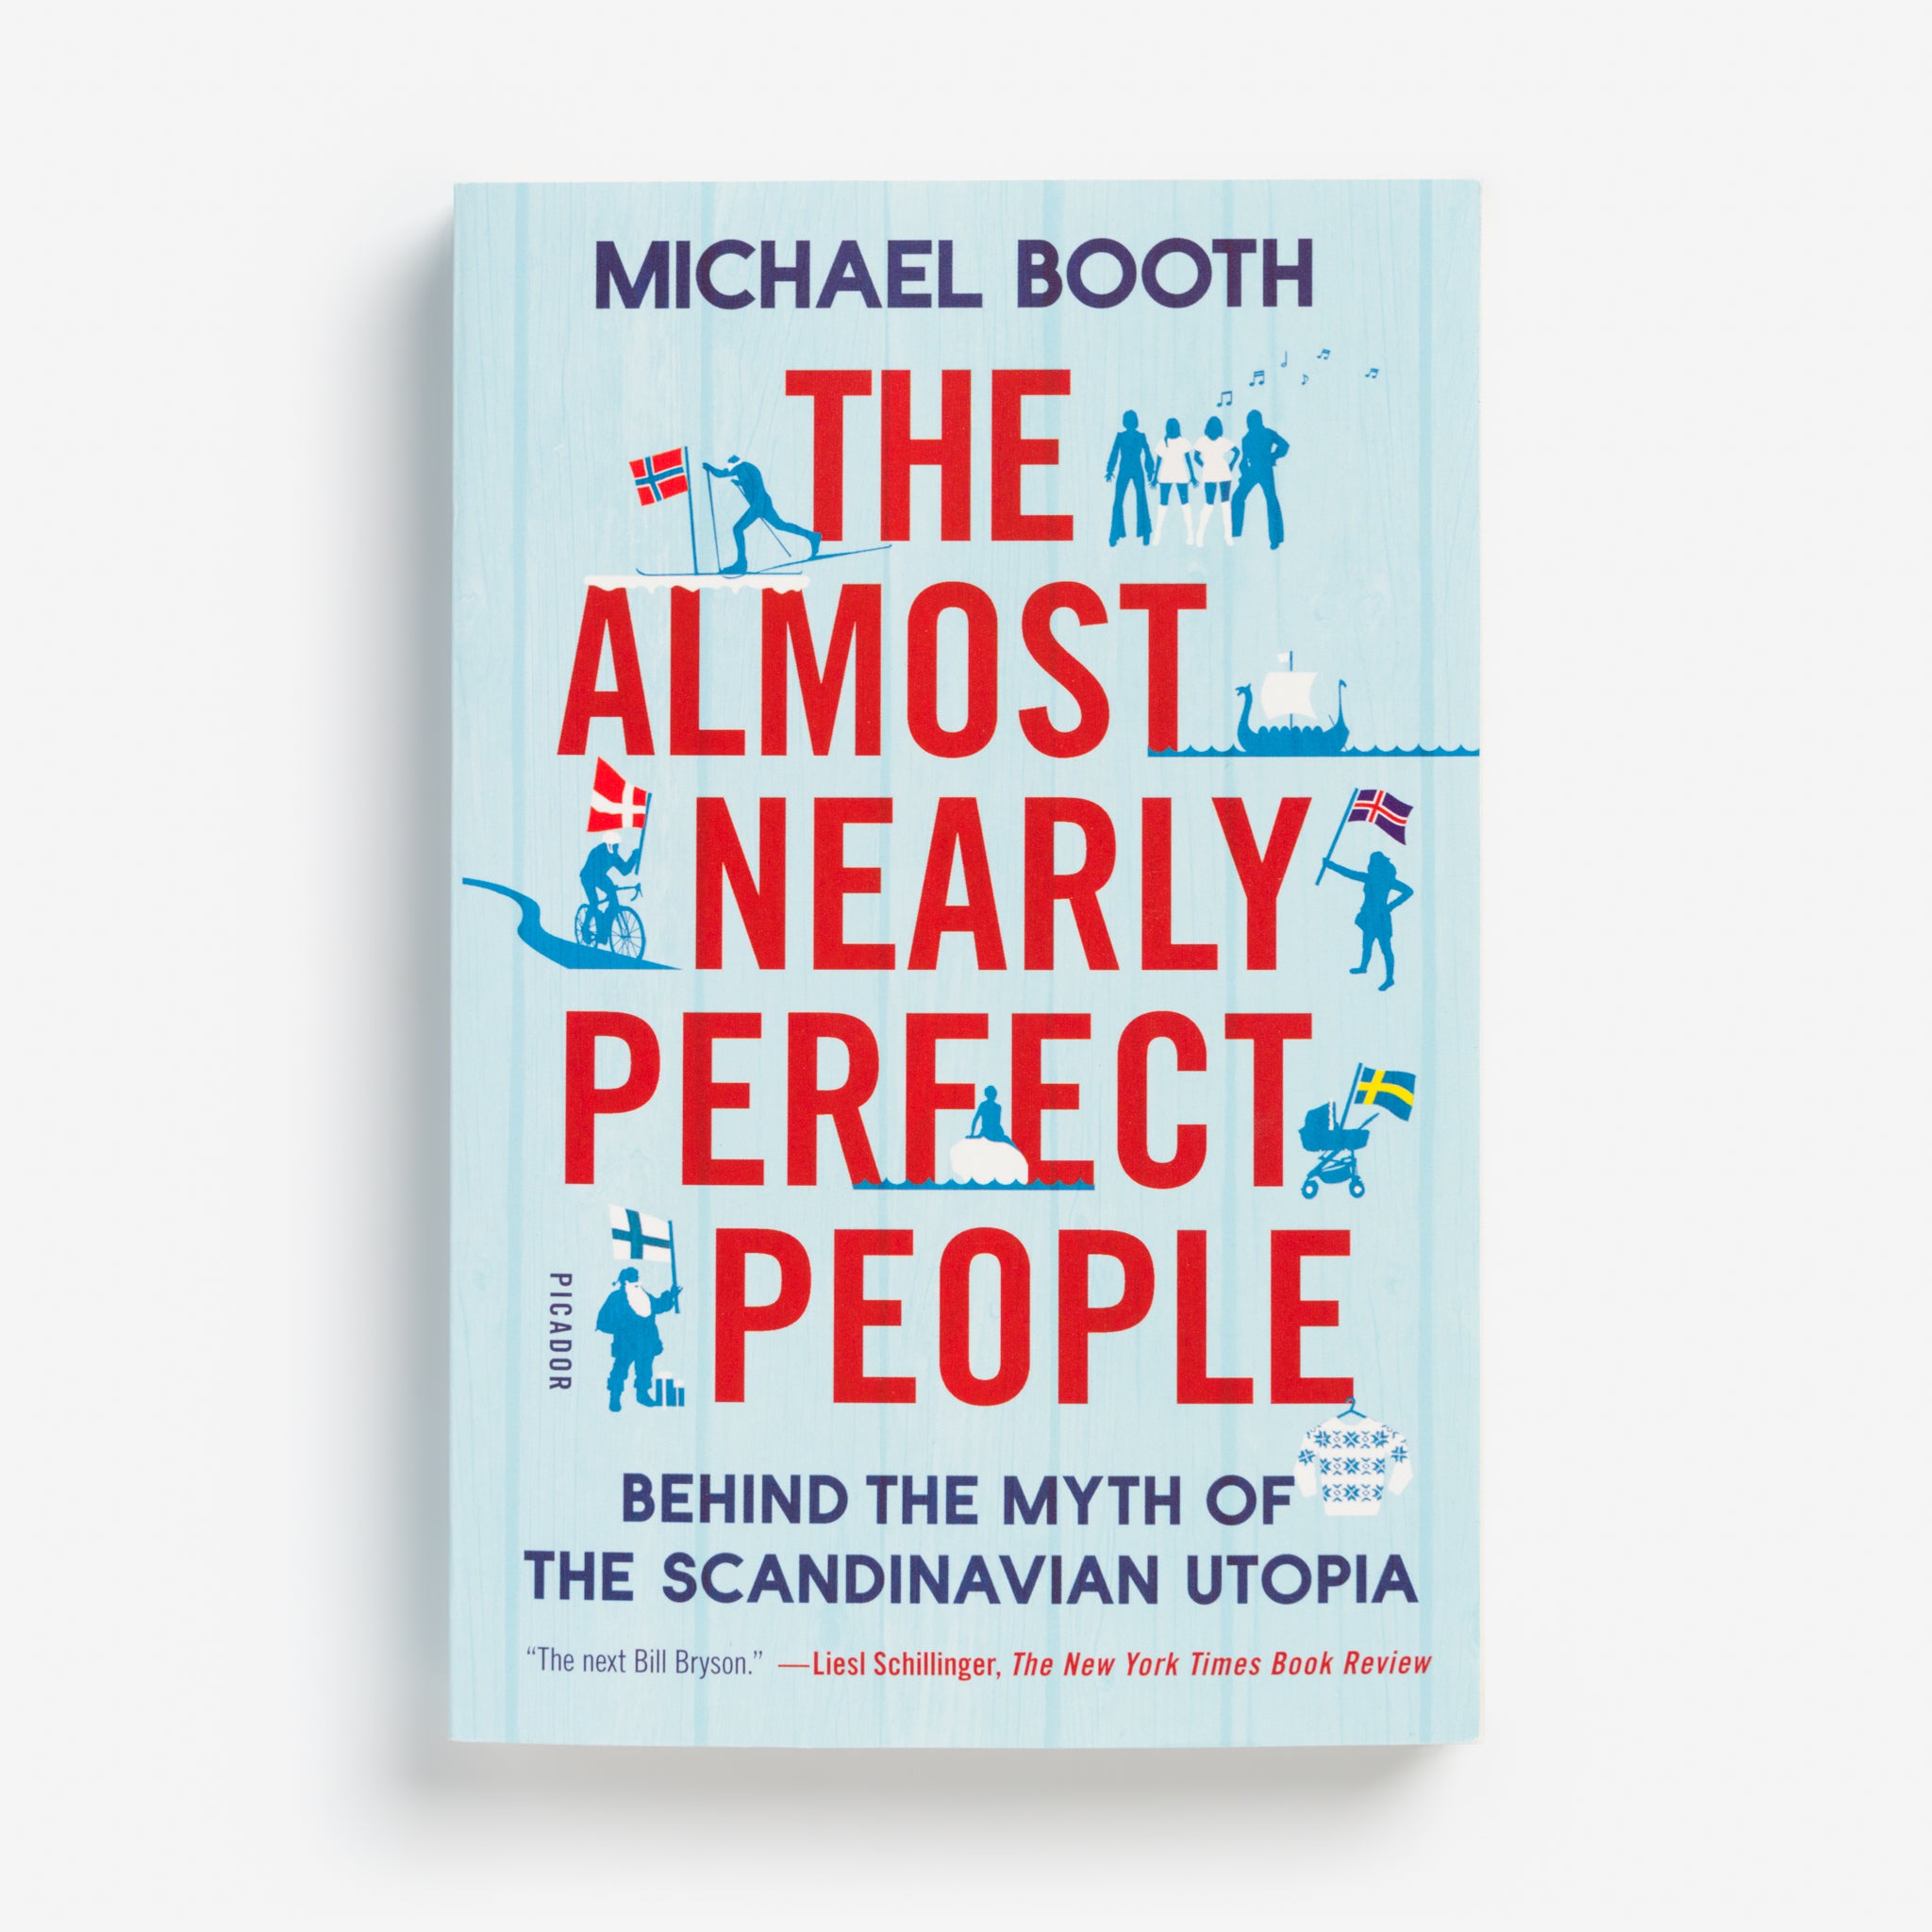 Almost Nearly Perfect People by Michael Booth